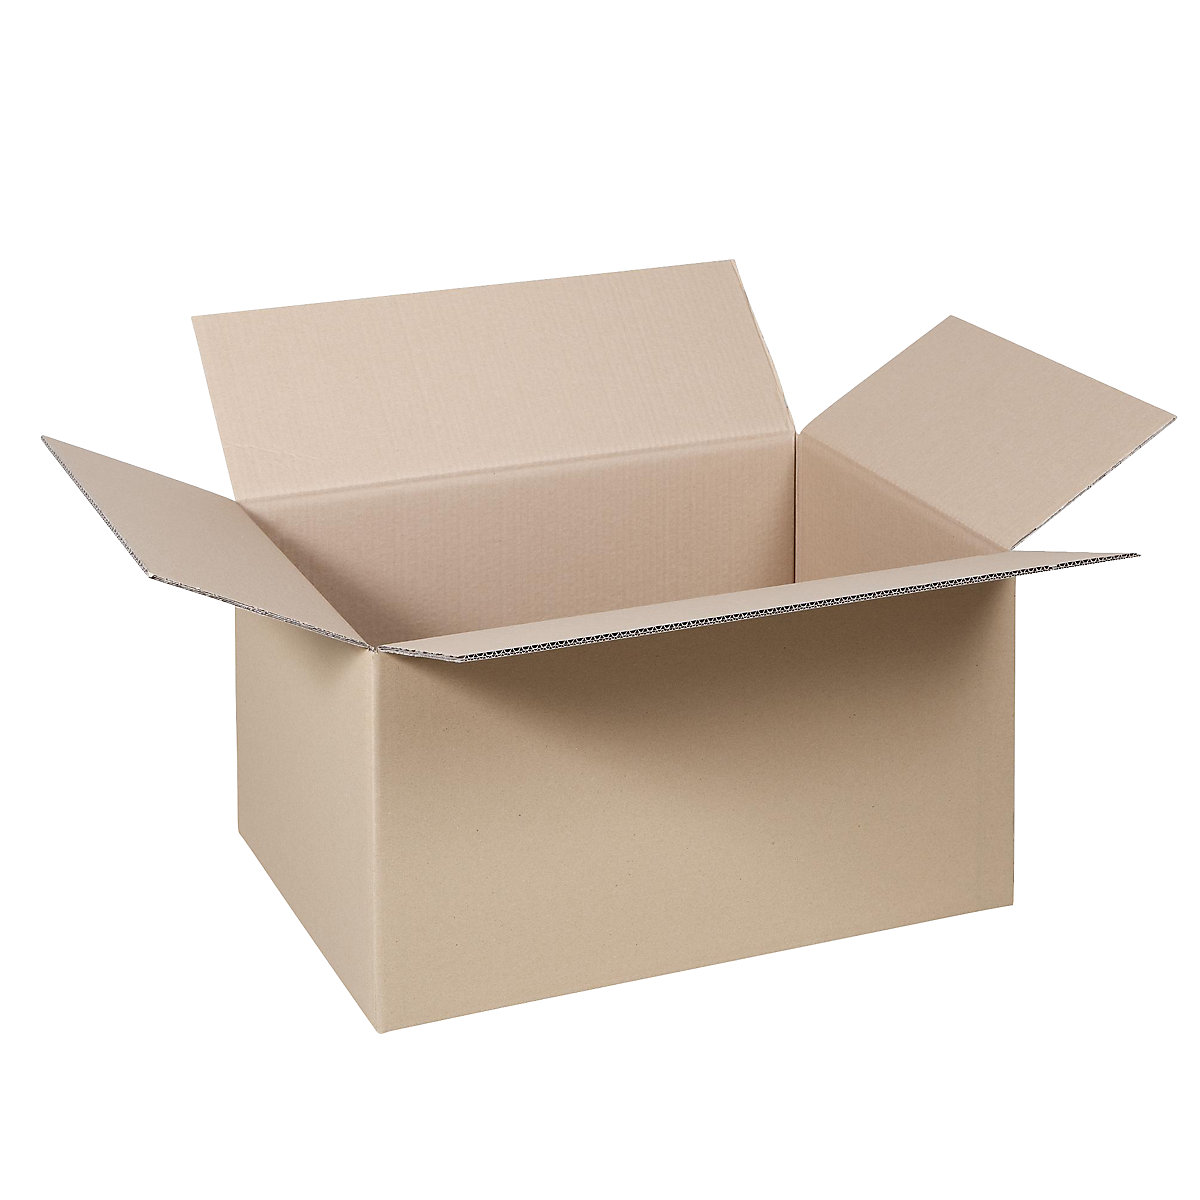 Folding cardboard box, FEFCO 0201, made of double fluted cardboard, internal dimensions 480 x 330 x 300 mm, 2.3 BC, pack of 50-27